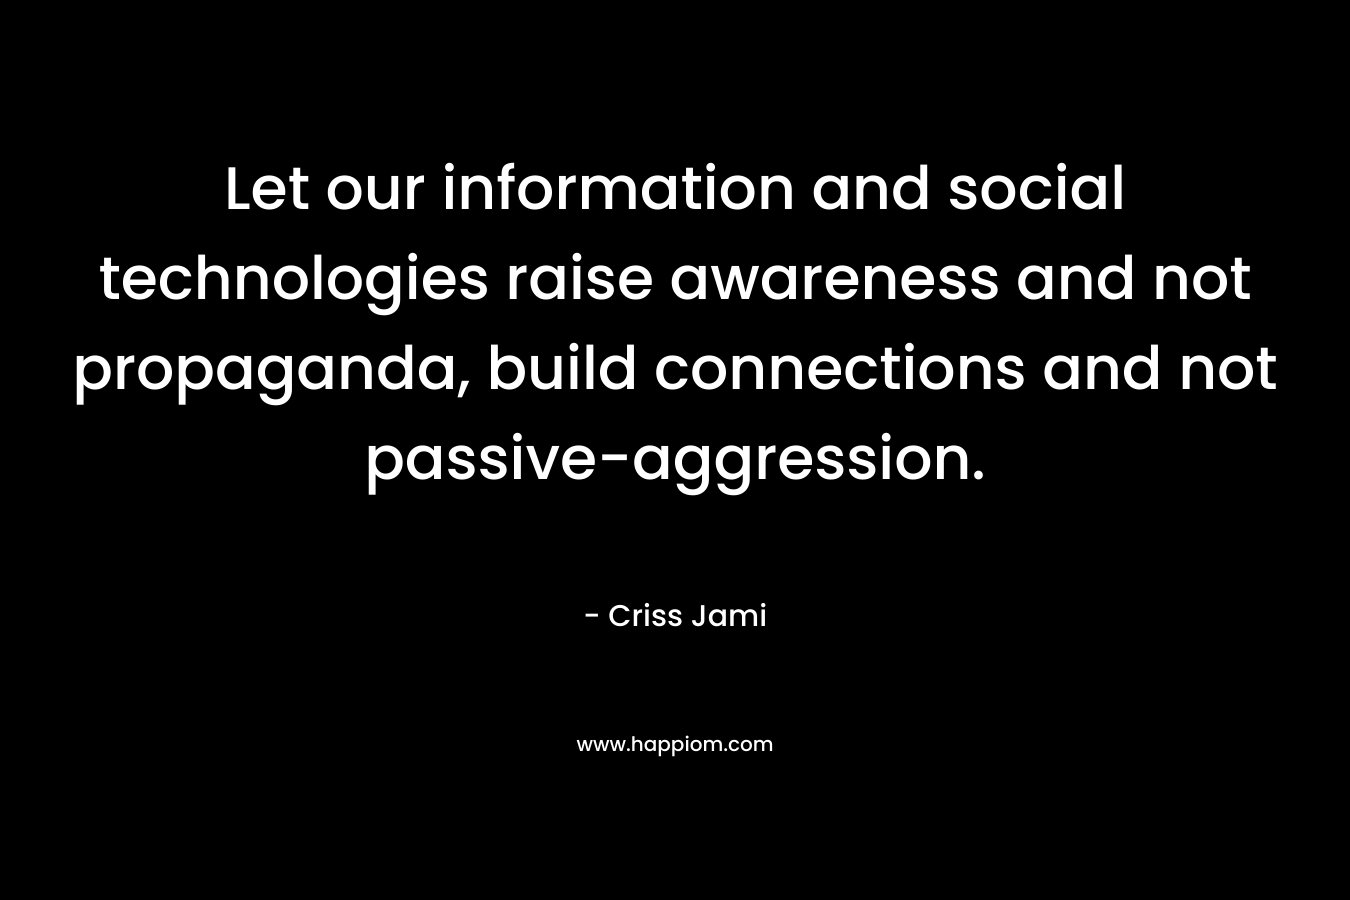 Let our information and social technologies raise awareness and not propaganda, build connections and not passive-aggression.